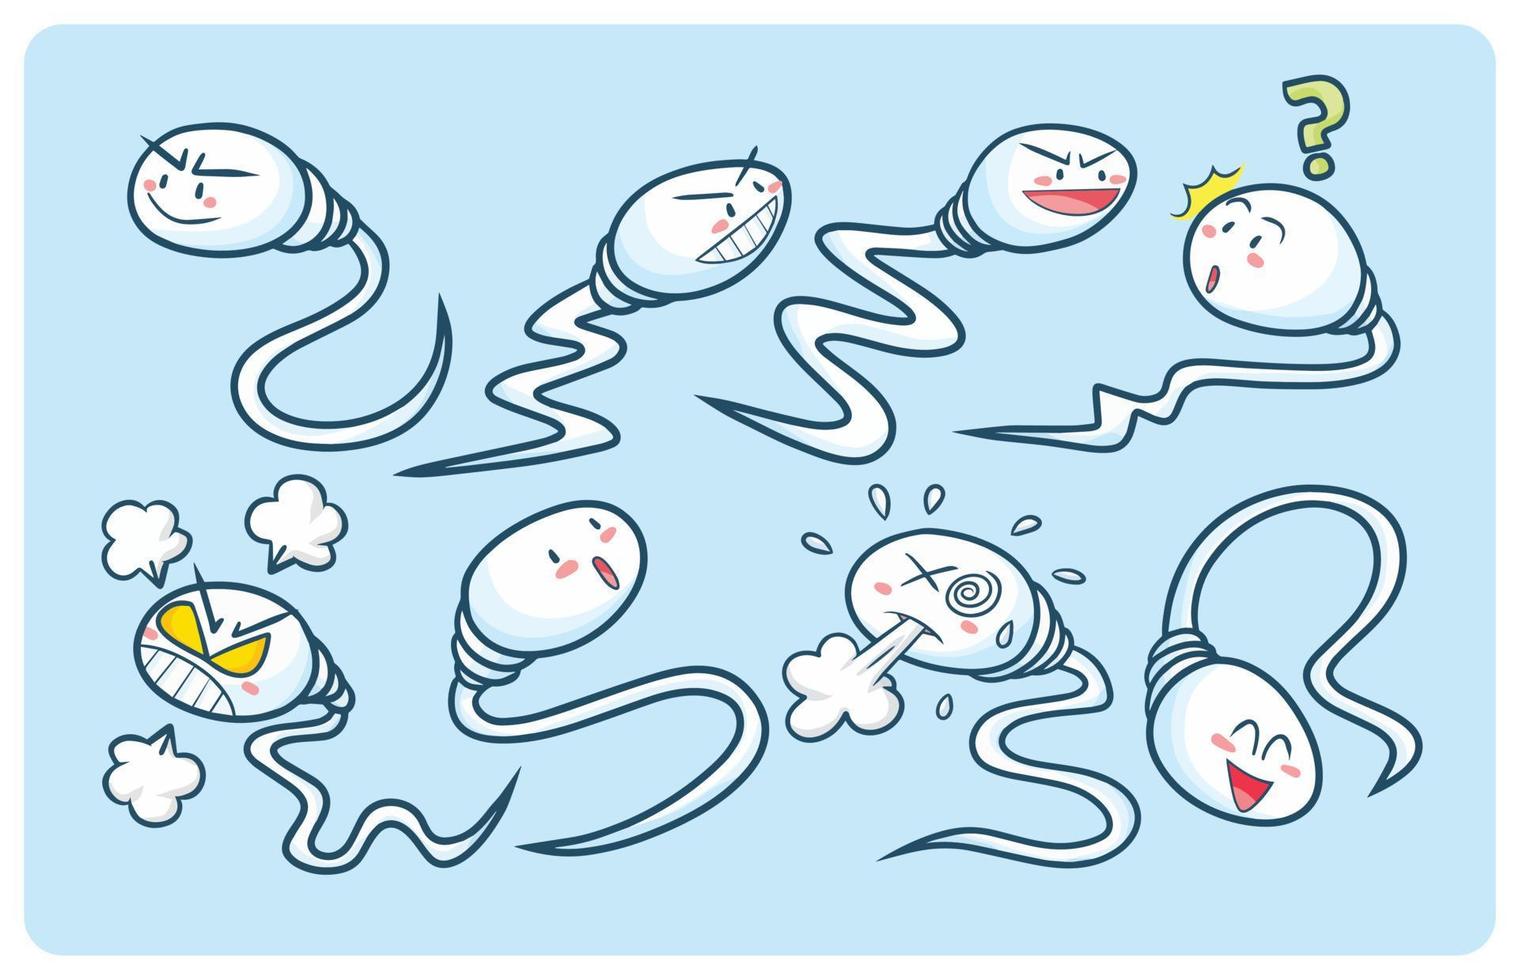 Funny sperm characters cartoon collection vector